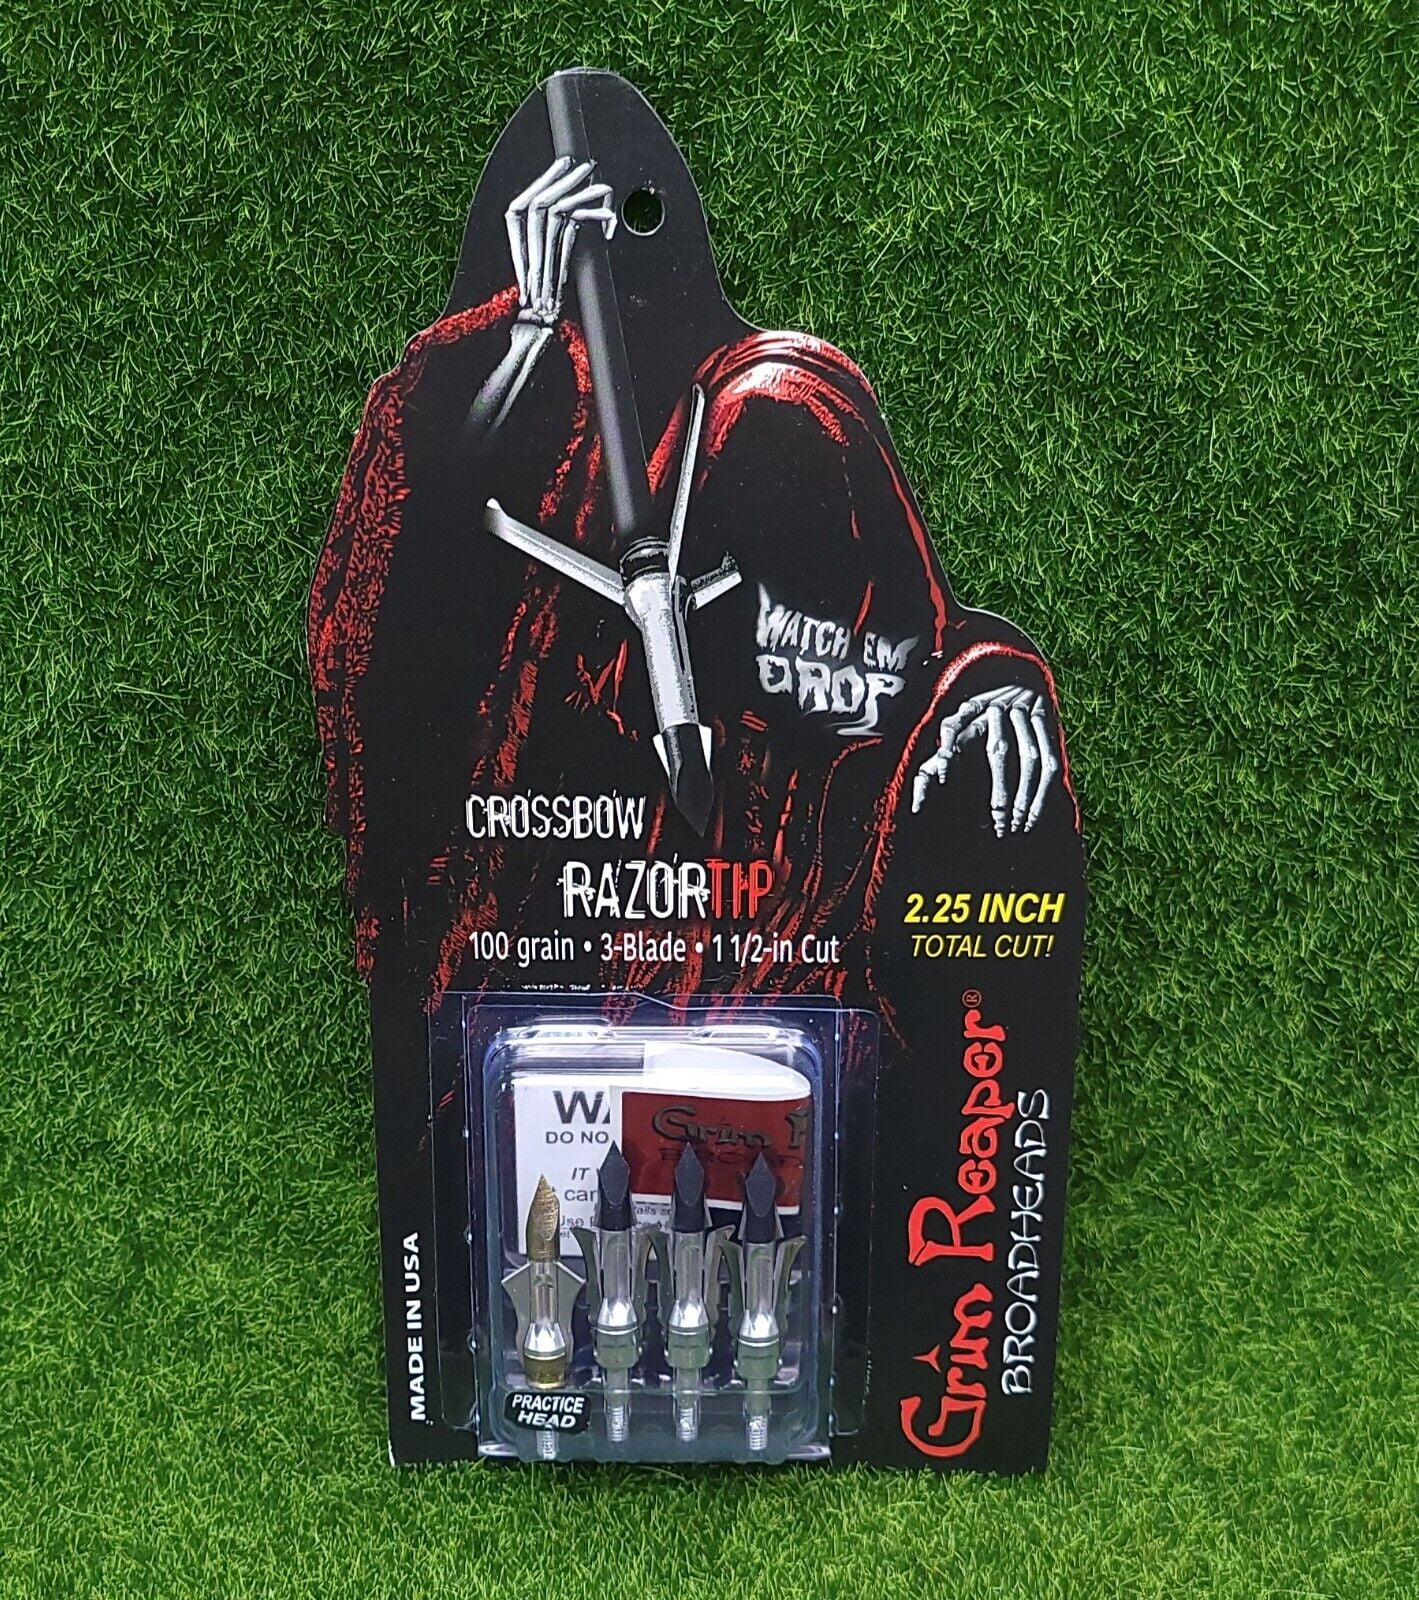 Grim Reaper Pro Series Crossbow 2 Blade 100 Grain 2 Cut - Spotted Dog  Sporting Goods